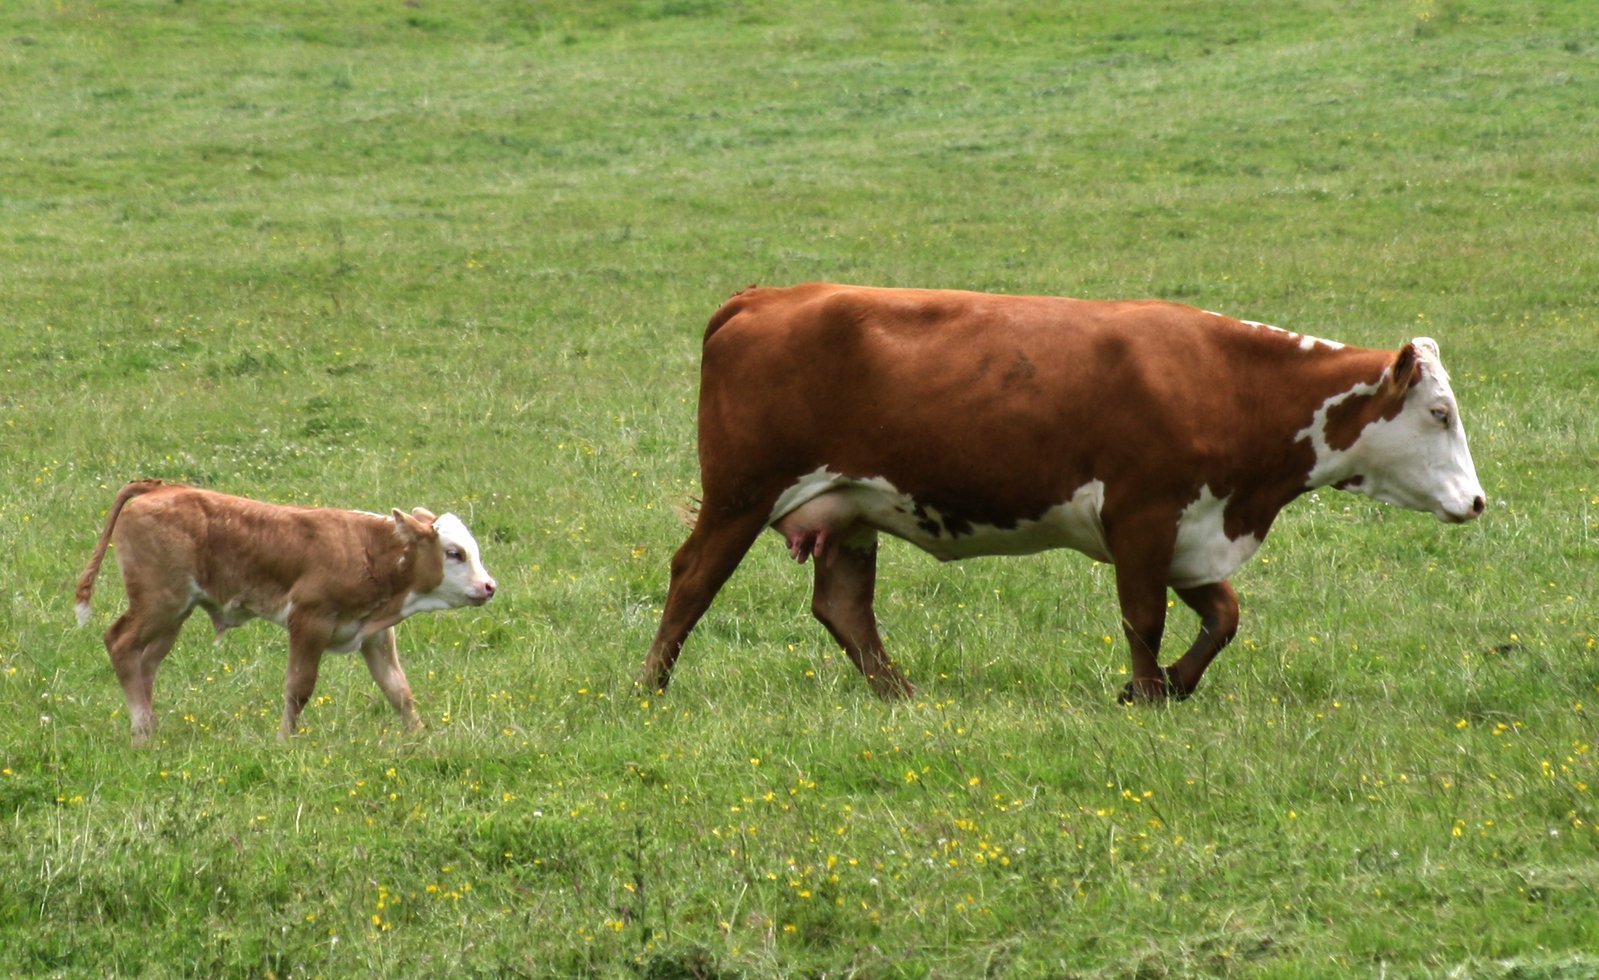 an adult and baby cow walking in the grass